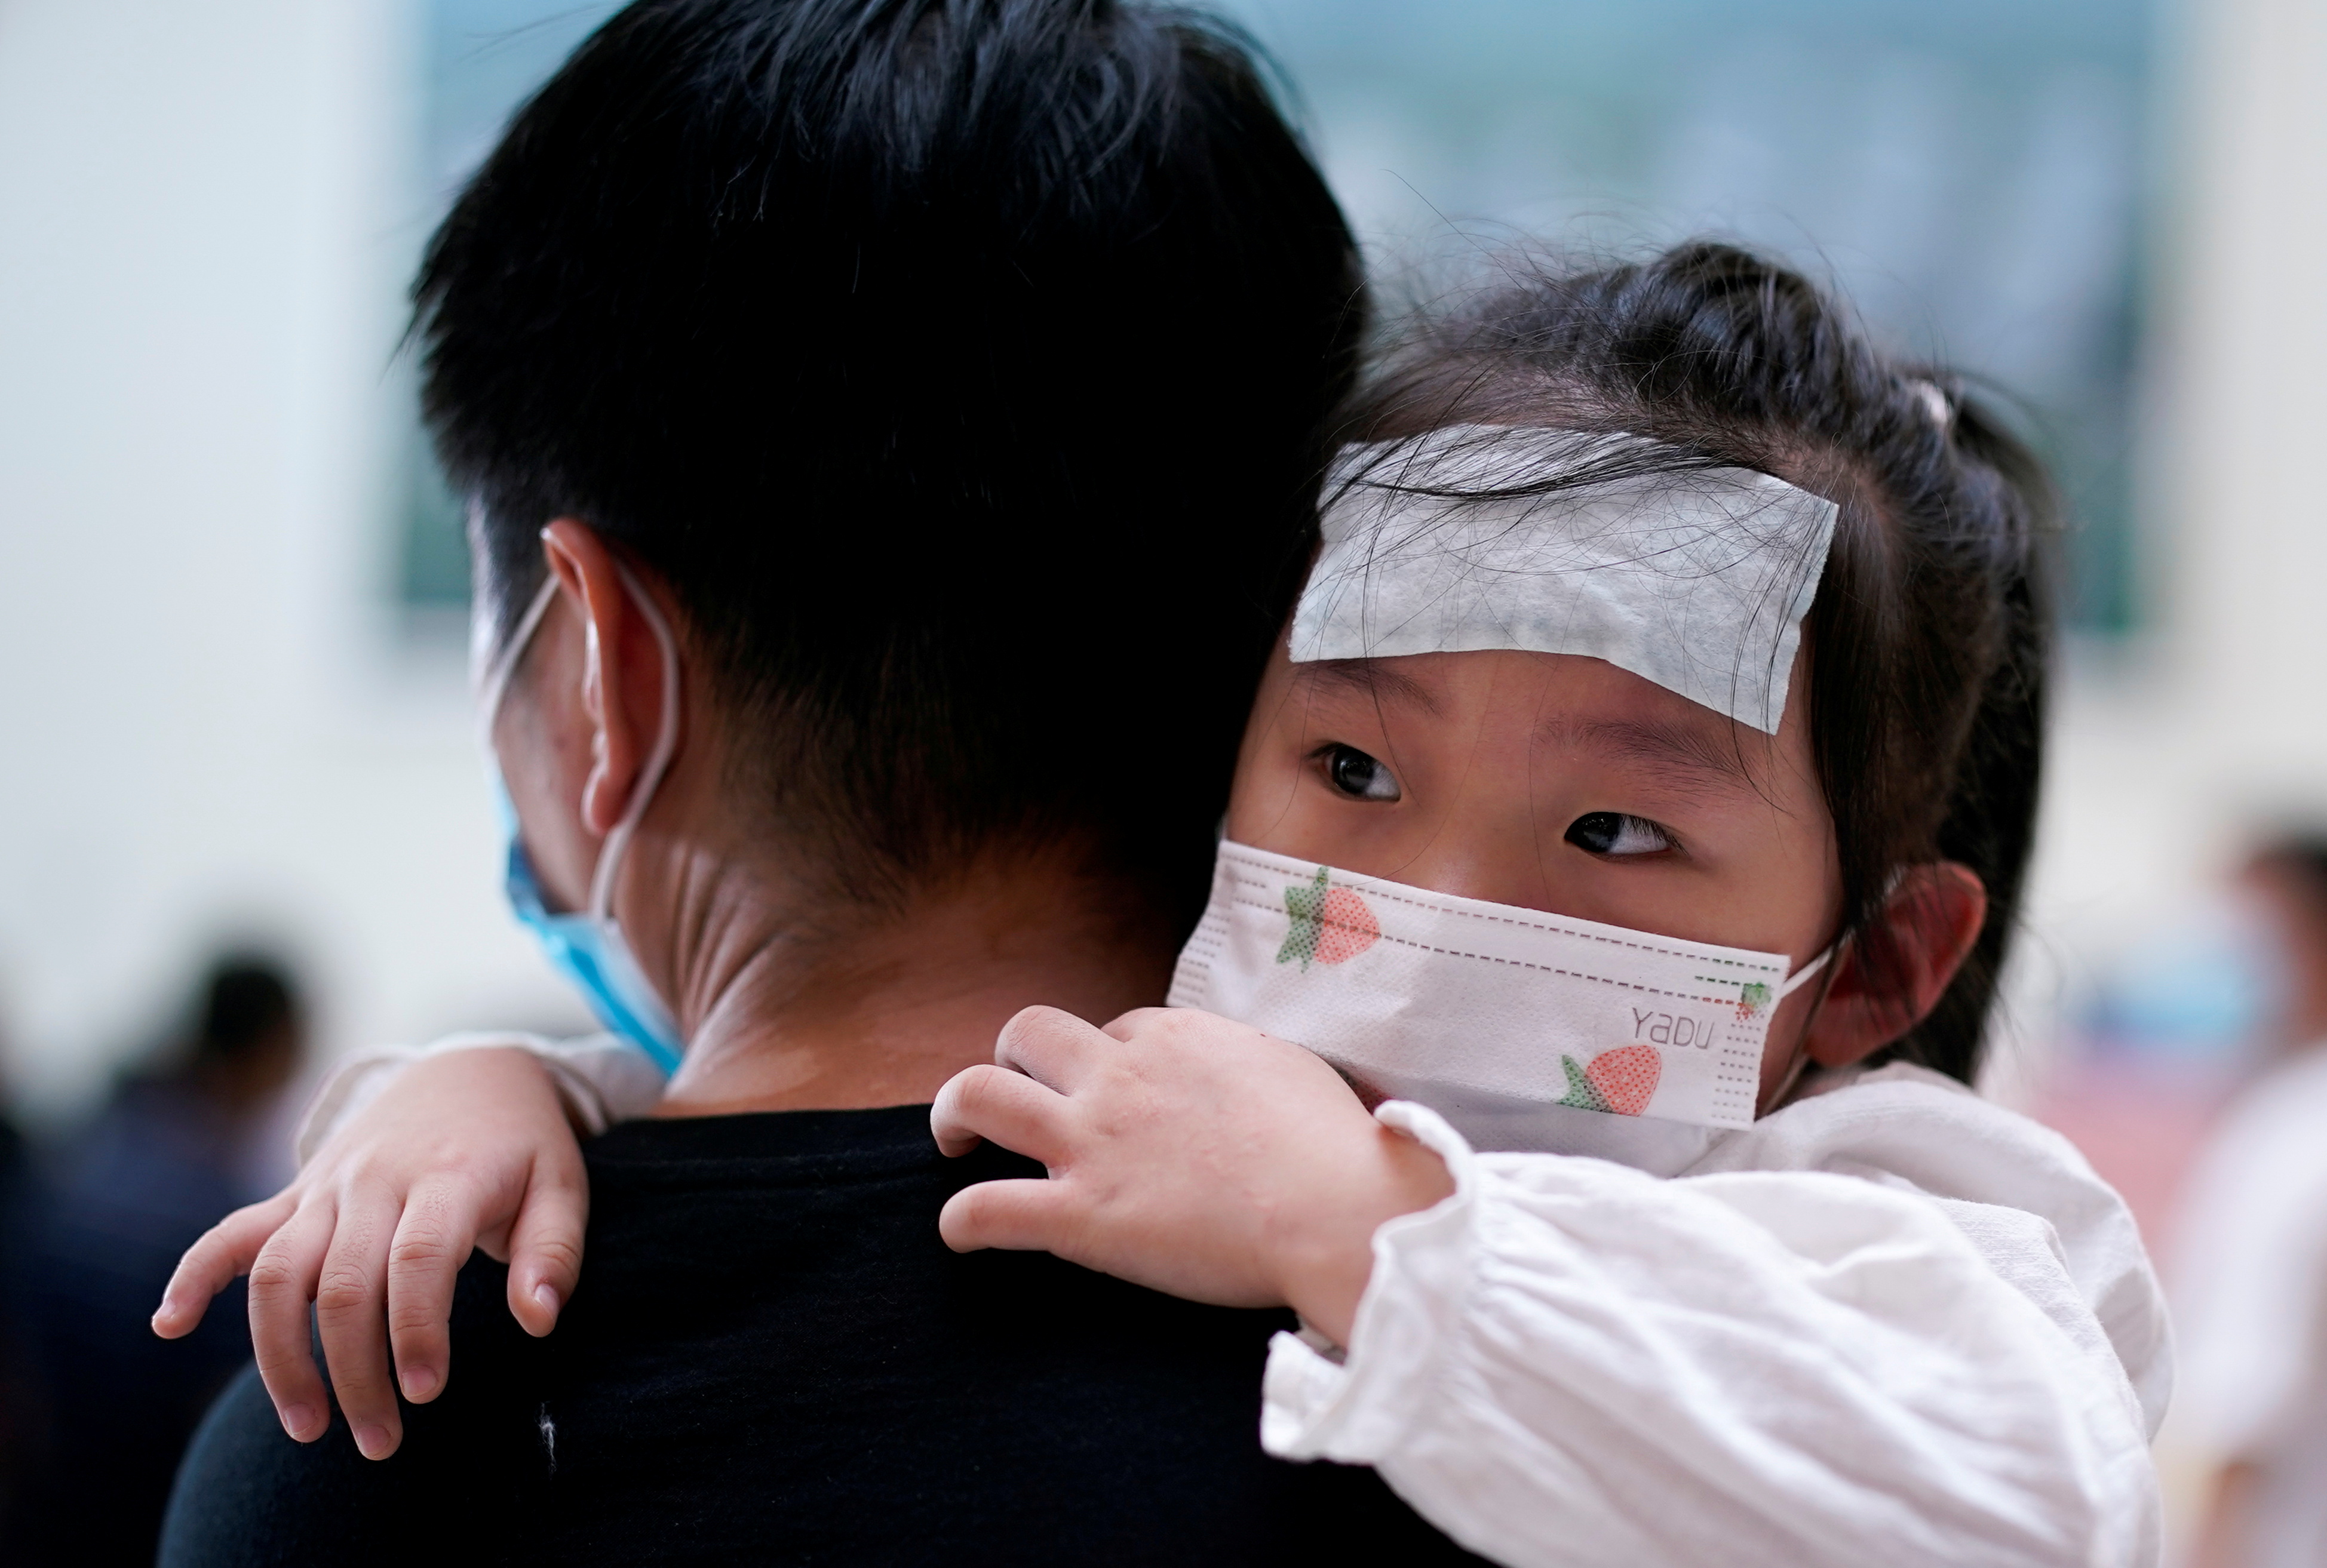 A man carries a child wearing a face mask during a government organised media tour at Tongji Hospital following the coronavirus disease (COVID-19) outbreak, in Wuhan, Hubei province, China September 3, 2020. REUTERS/Aly Song/File Photo